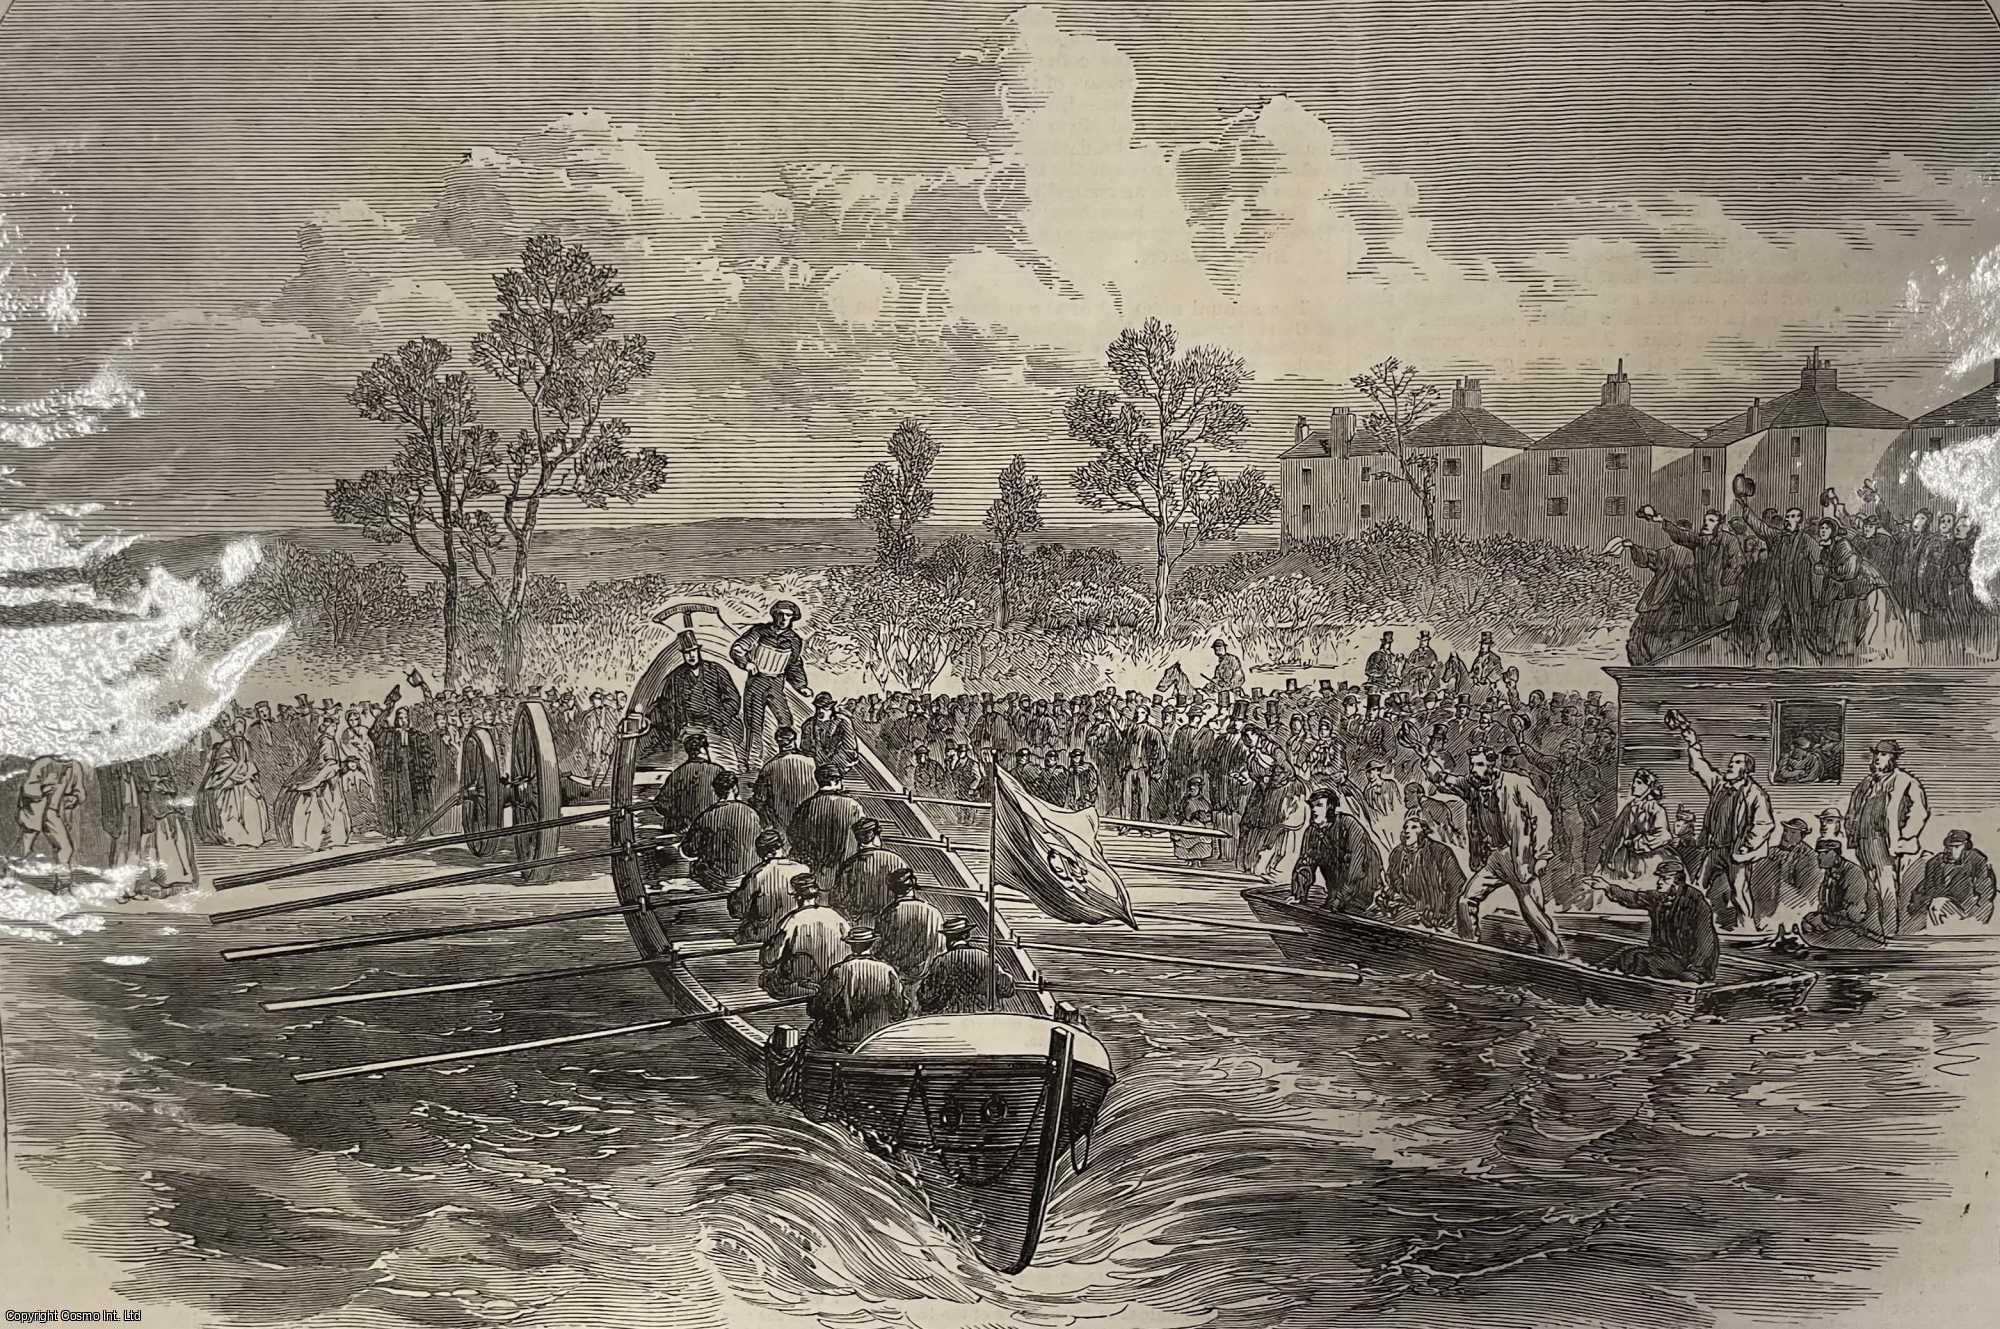 LIFEBOATS - Launch of the 'Isis' Lifeboat at Oxford. An original print from the Illustrated London News, 1866.